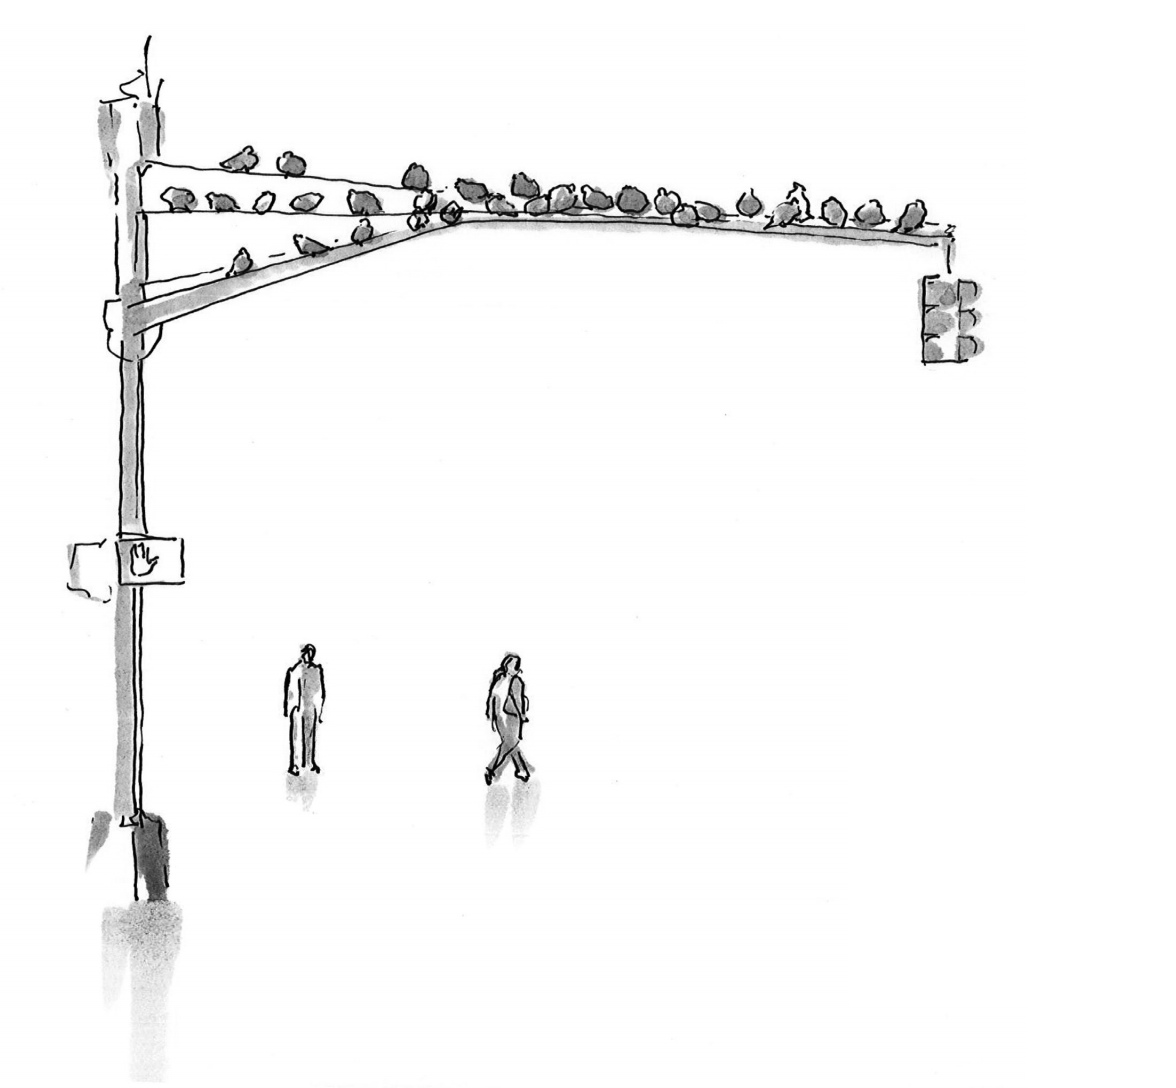 Image of two people walking in different directions under a traffic light pole lined with birds along the top